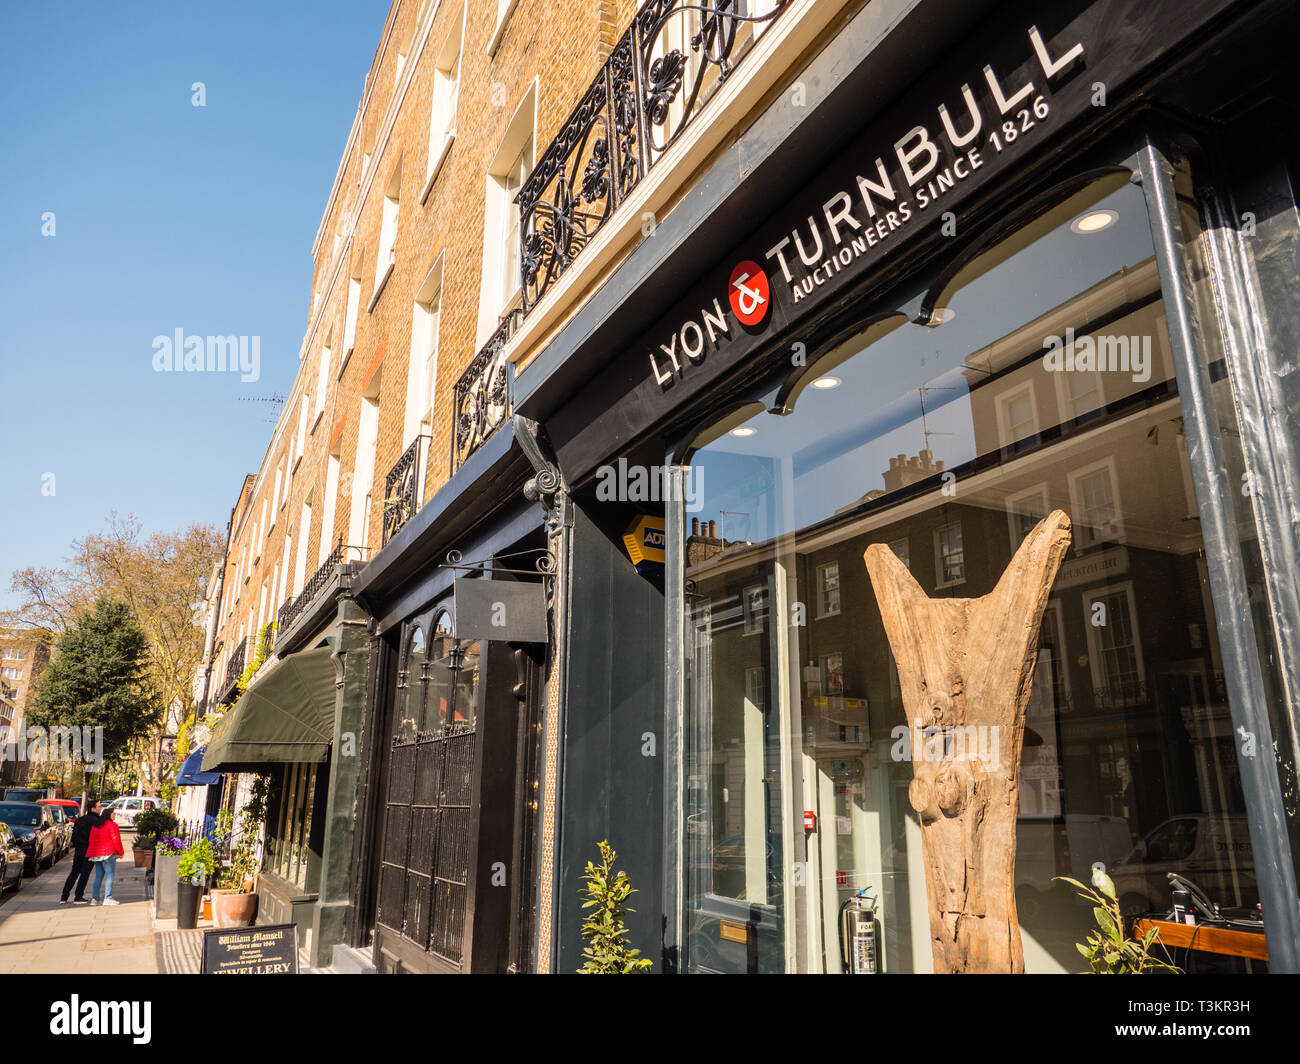 Lyon & Turnbull Auction House, Connaught Village, Westminster, London, UK, GB. Stock Photo